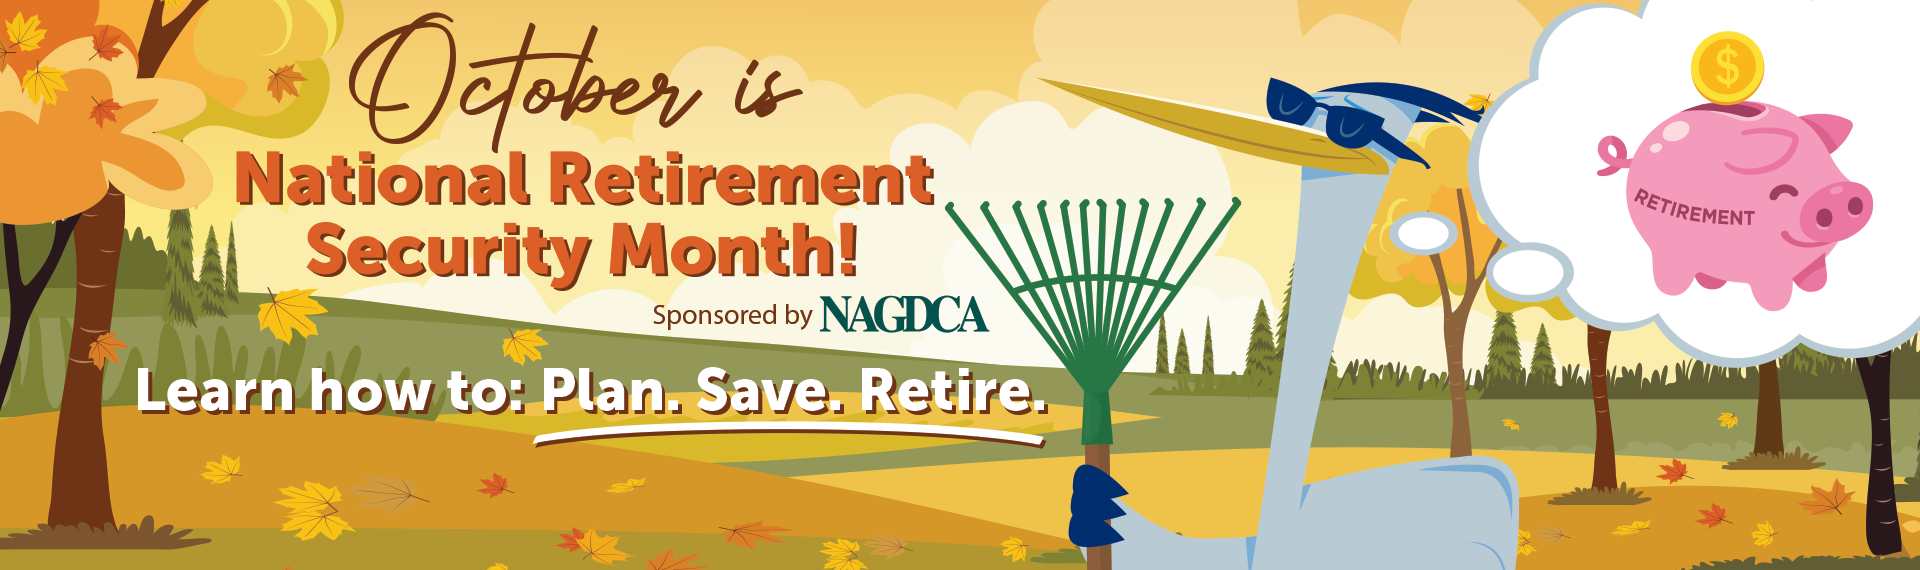 October is National Retirement Security Month! Sponsored by NAGDCA. Learn how to: Plan. Save. Retire.